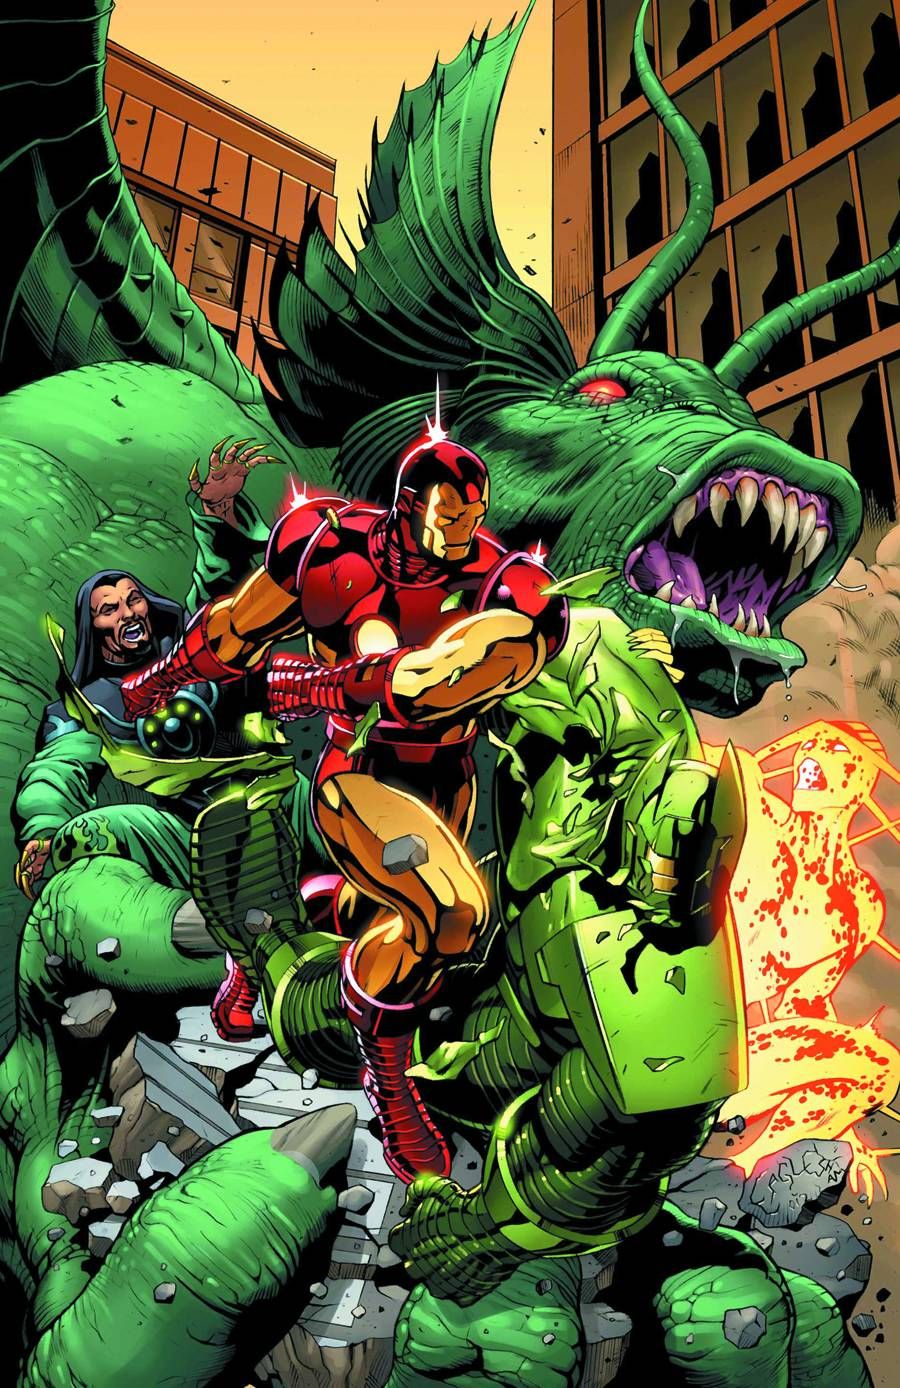 fin fang foom in marvel comics iron man with the mandarin